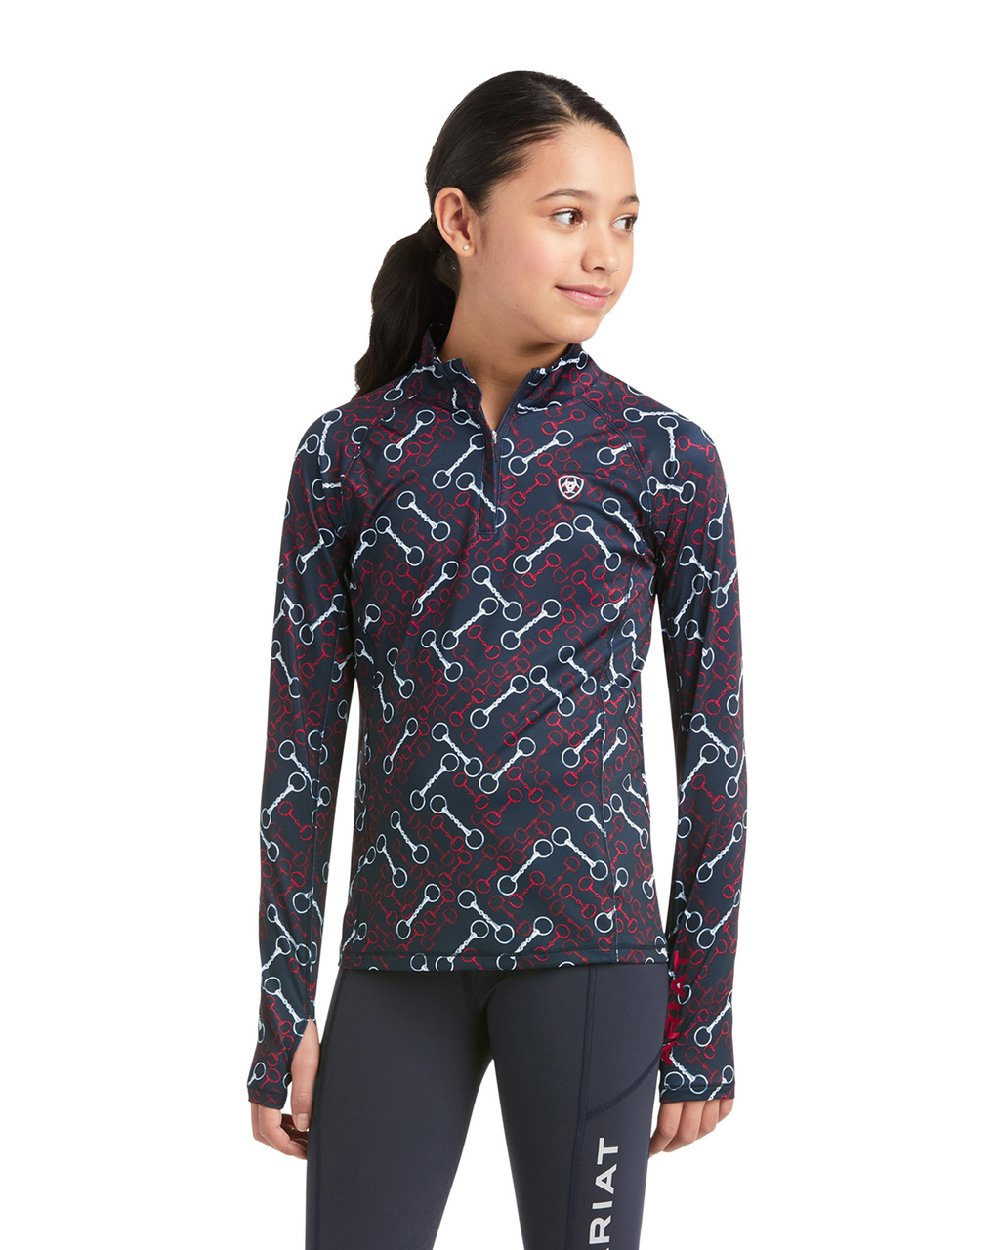 Ariat Childrens Lowell 2.0 1/4 Zip Base Layer in Team Print 